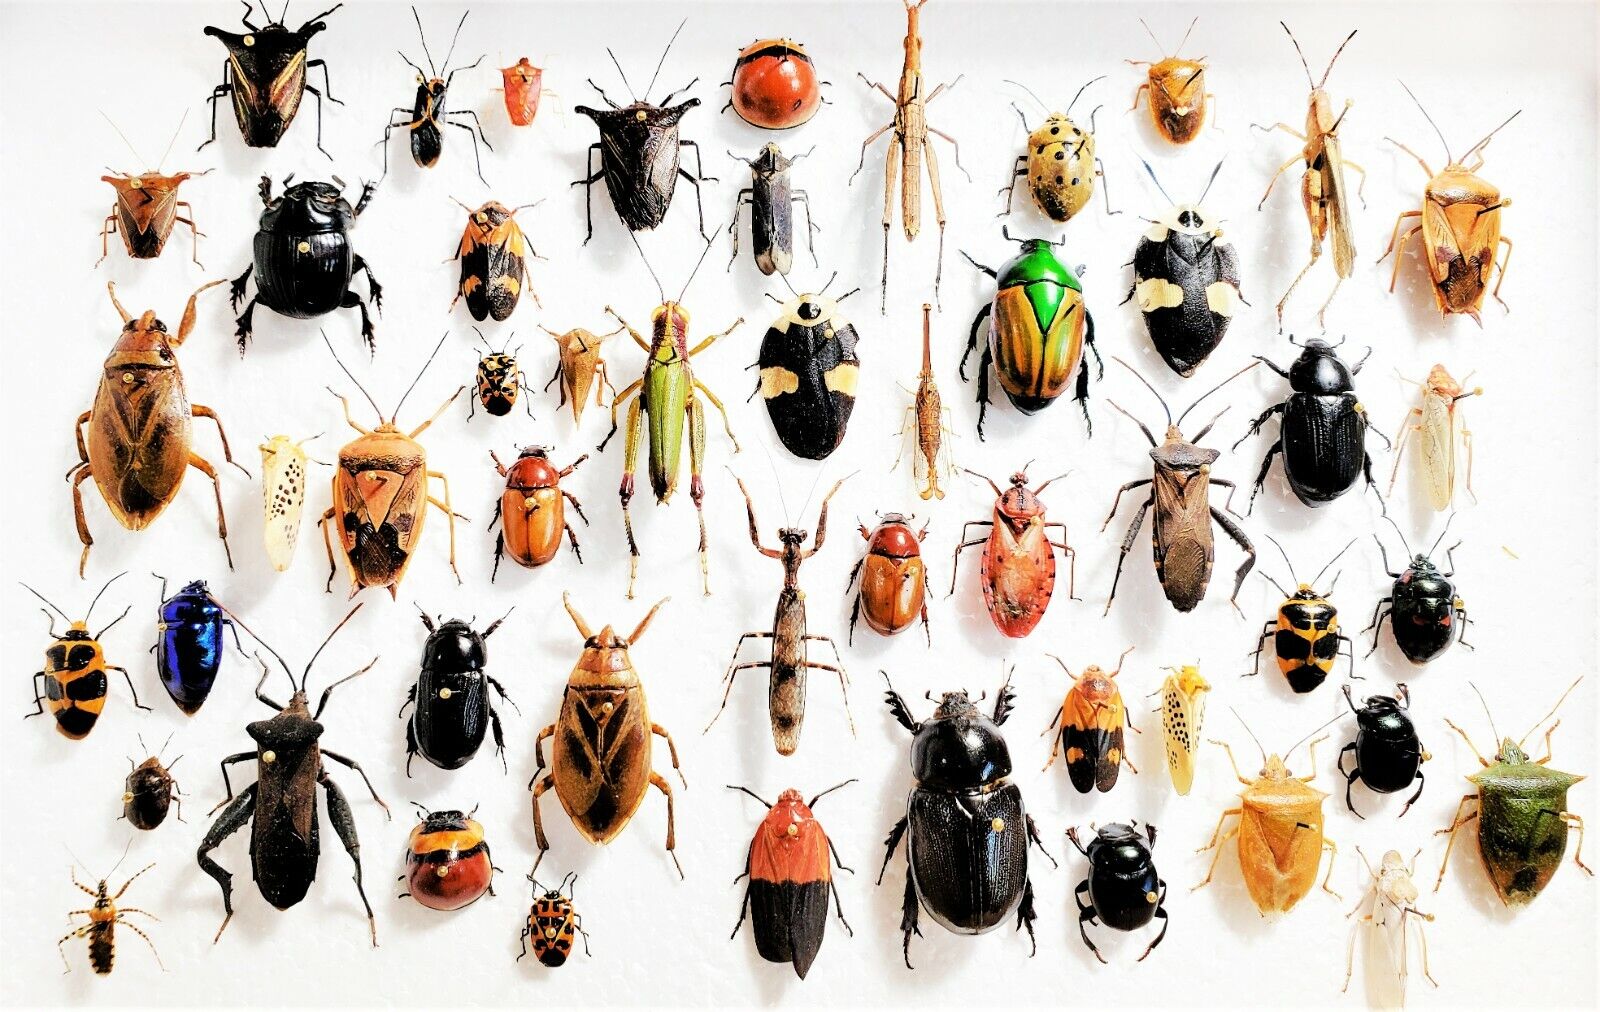 LOT OF 50 pieces mixed lot of assorted beetles bugs insects collection